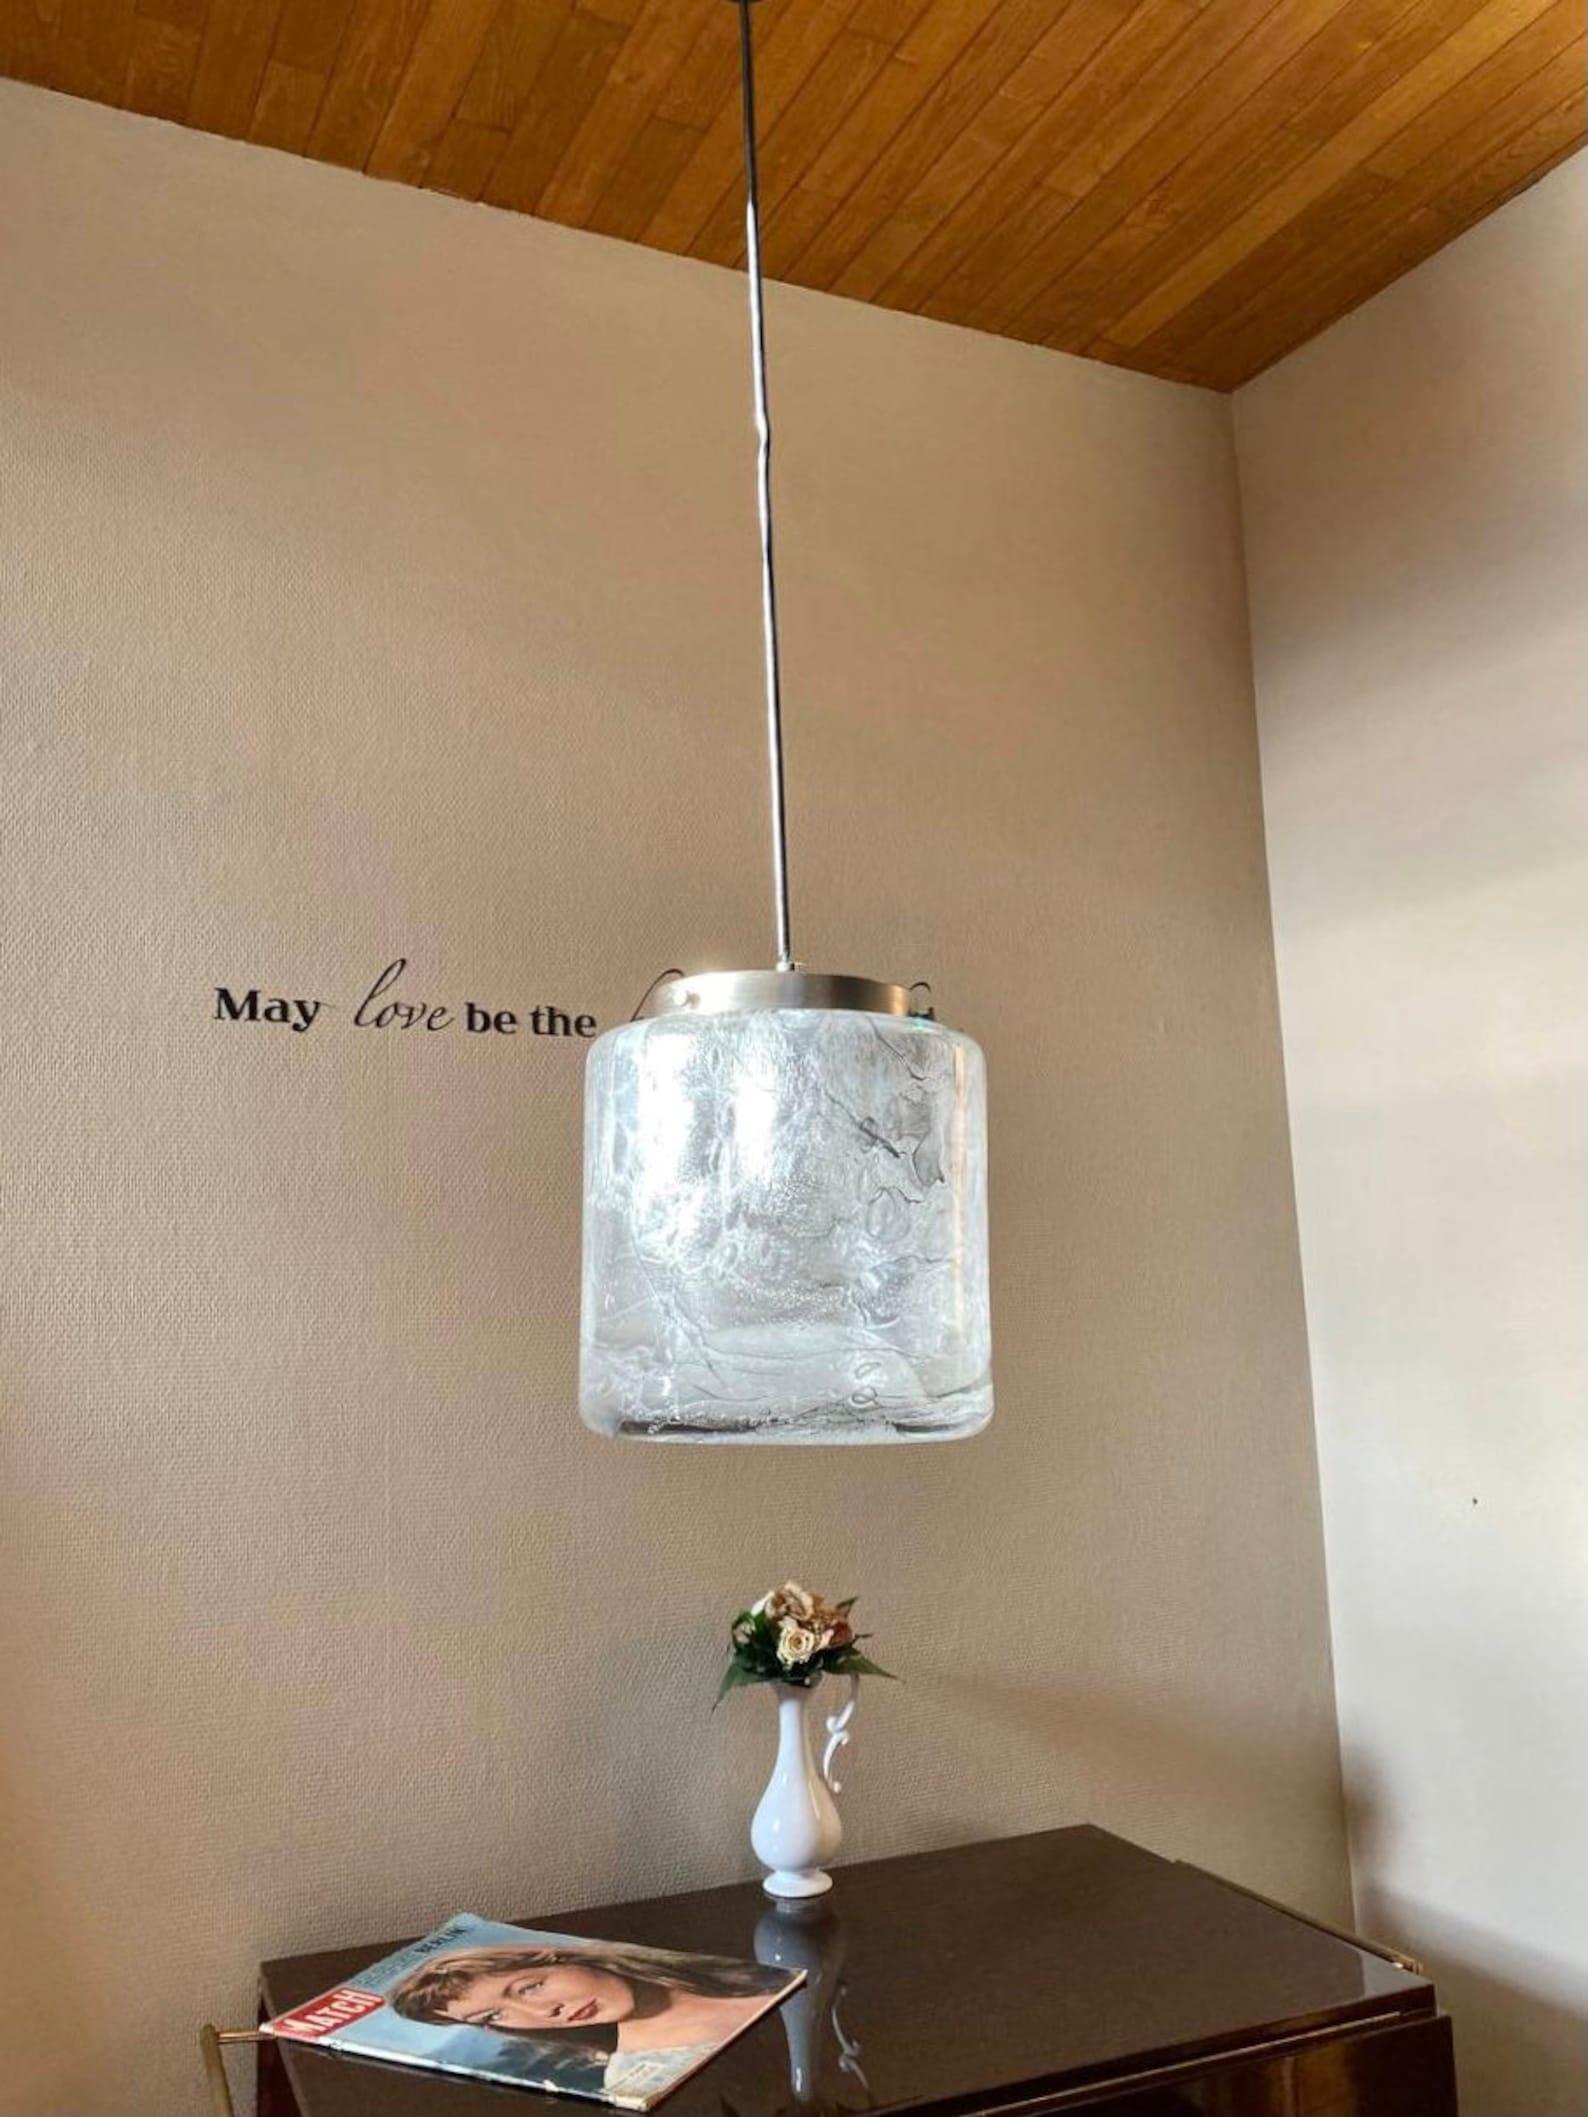 Stylish vintage pendant light.

Pendant light made of murano glass (made in Murano, Italy).

This pendant light is perfect for a Loft, Minimalism, Electrical, Modern interiors.

In very good vintage condition.

There is a small crack.

The